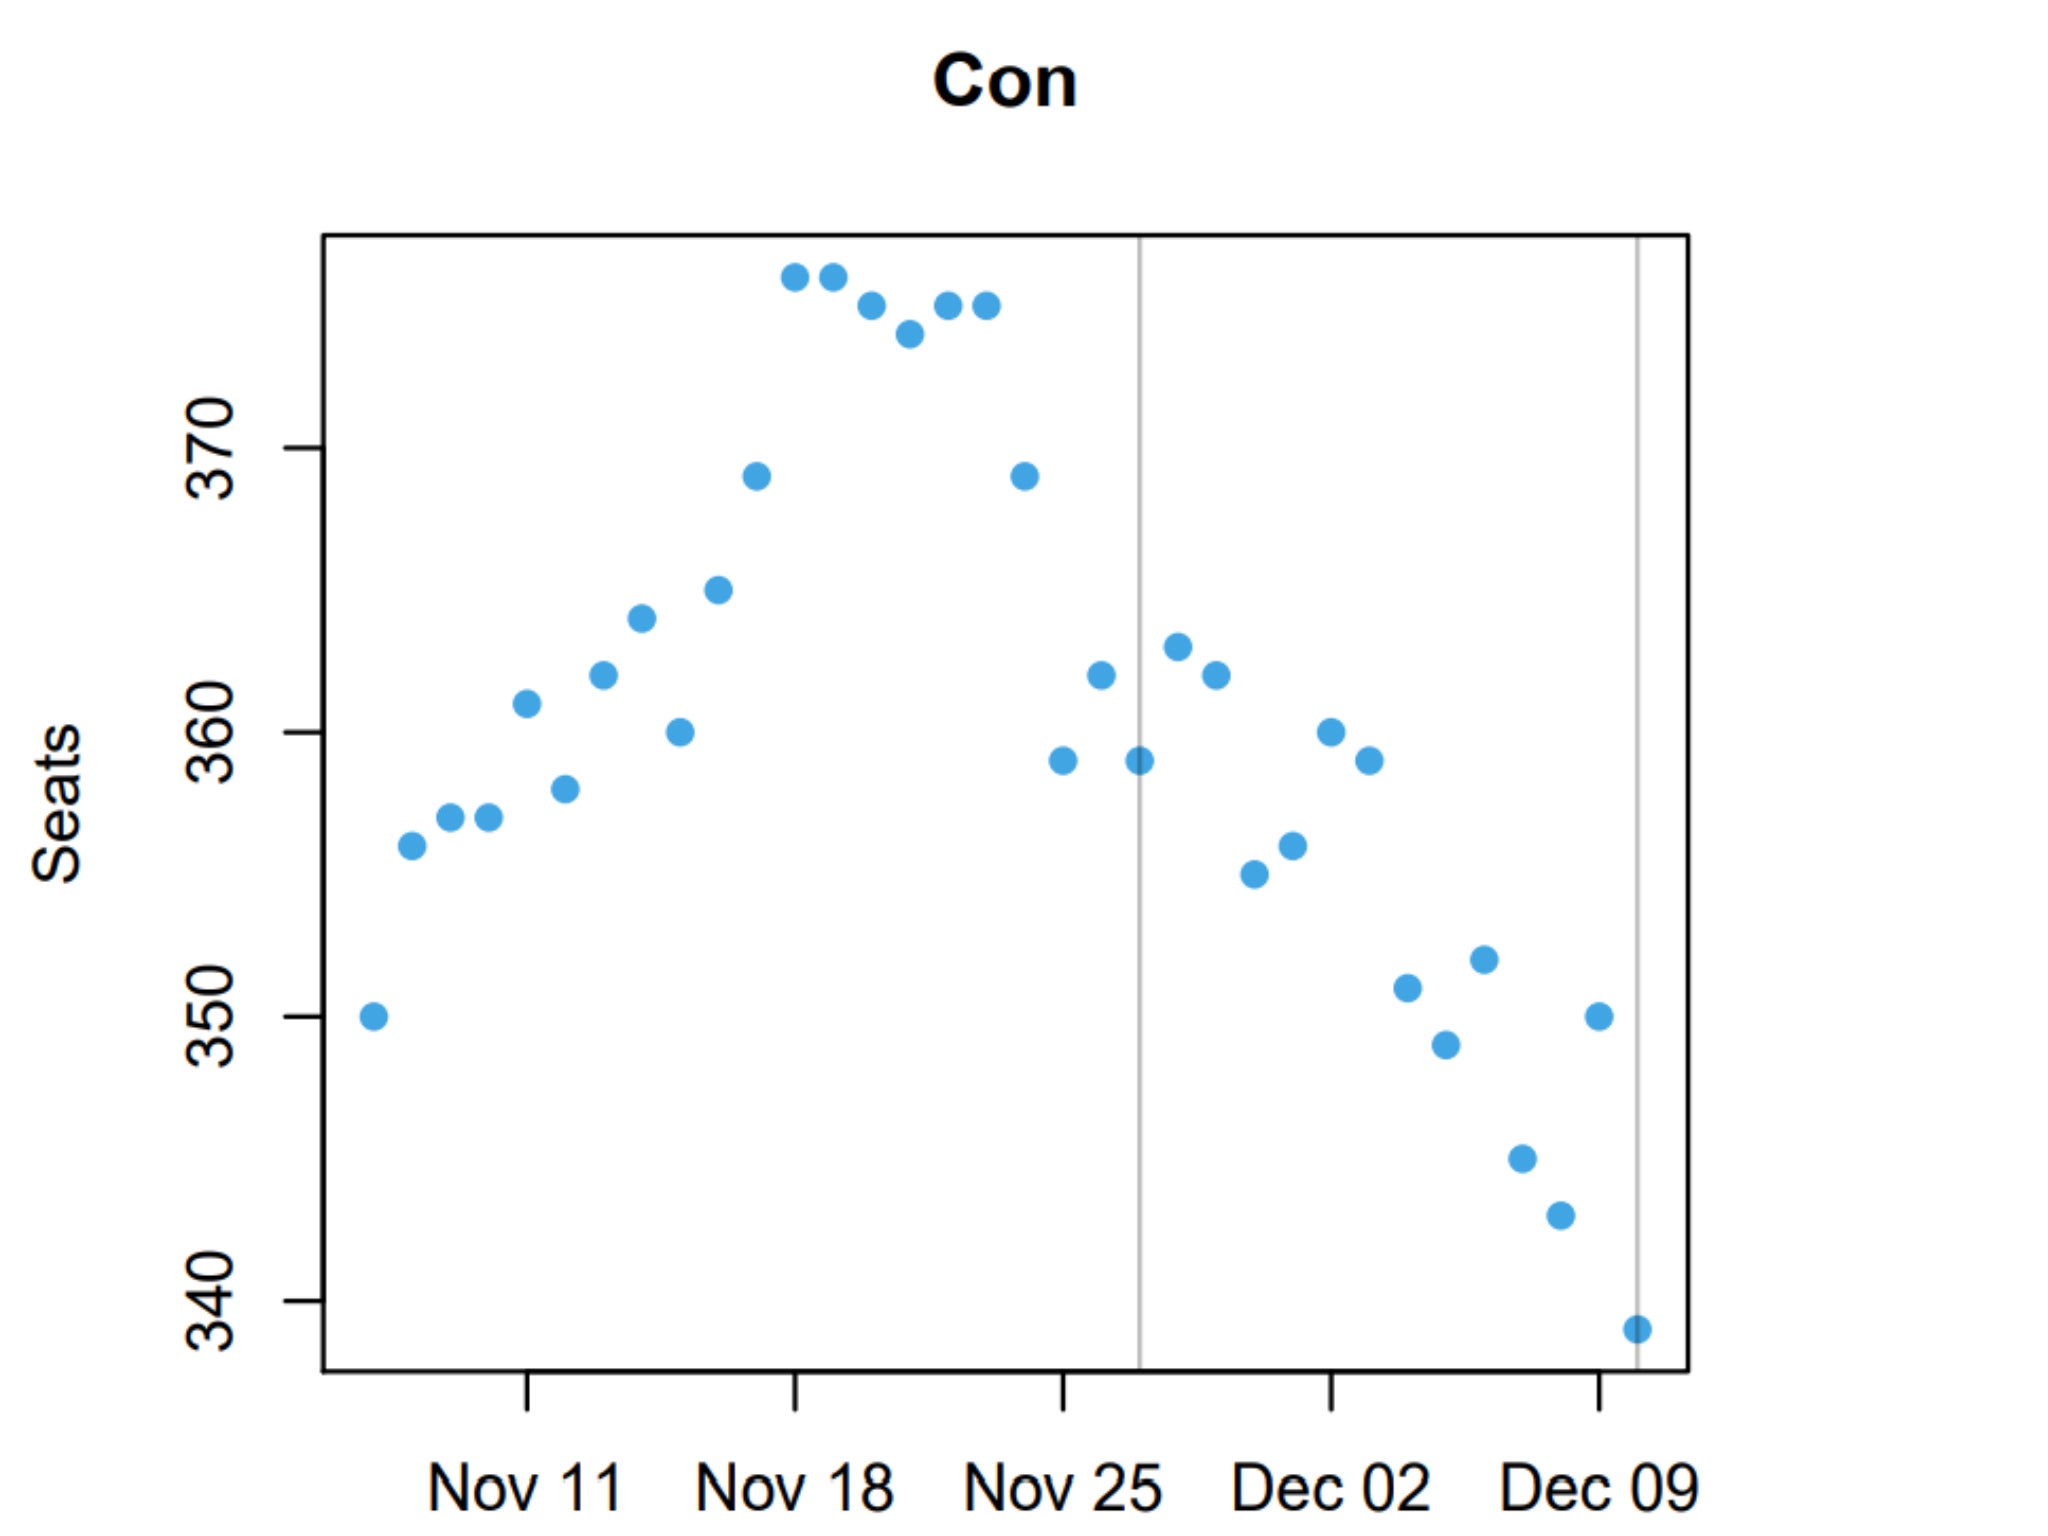 A scatter plot of YouGov’s estimates of the number of seats the Conservatives are likely to win